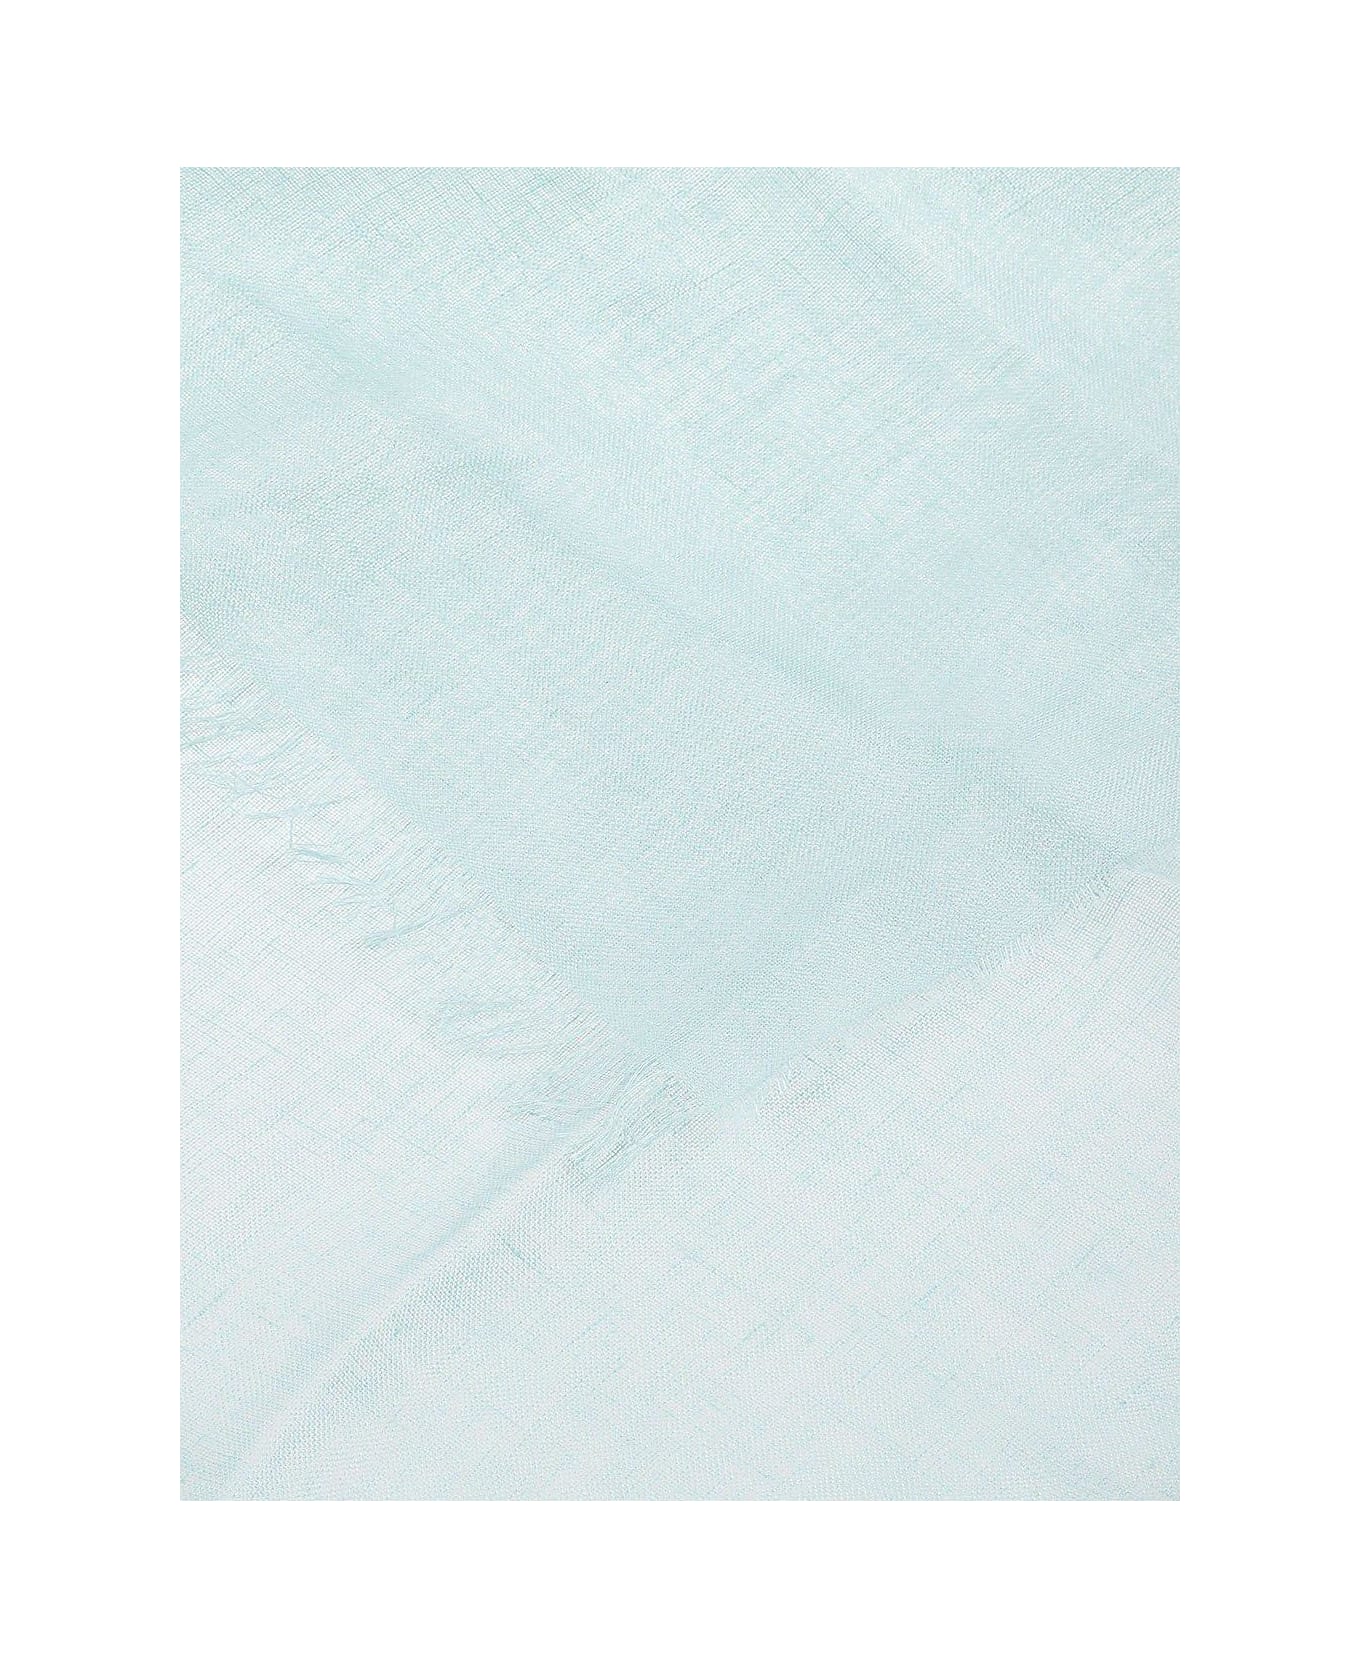 Weekend Max Mara Butterfly Embroidered Stole - Azzurro